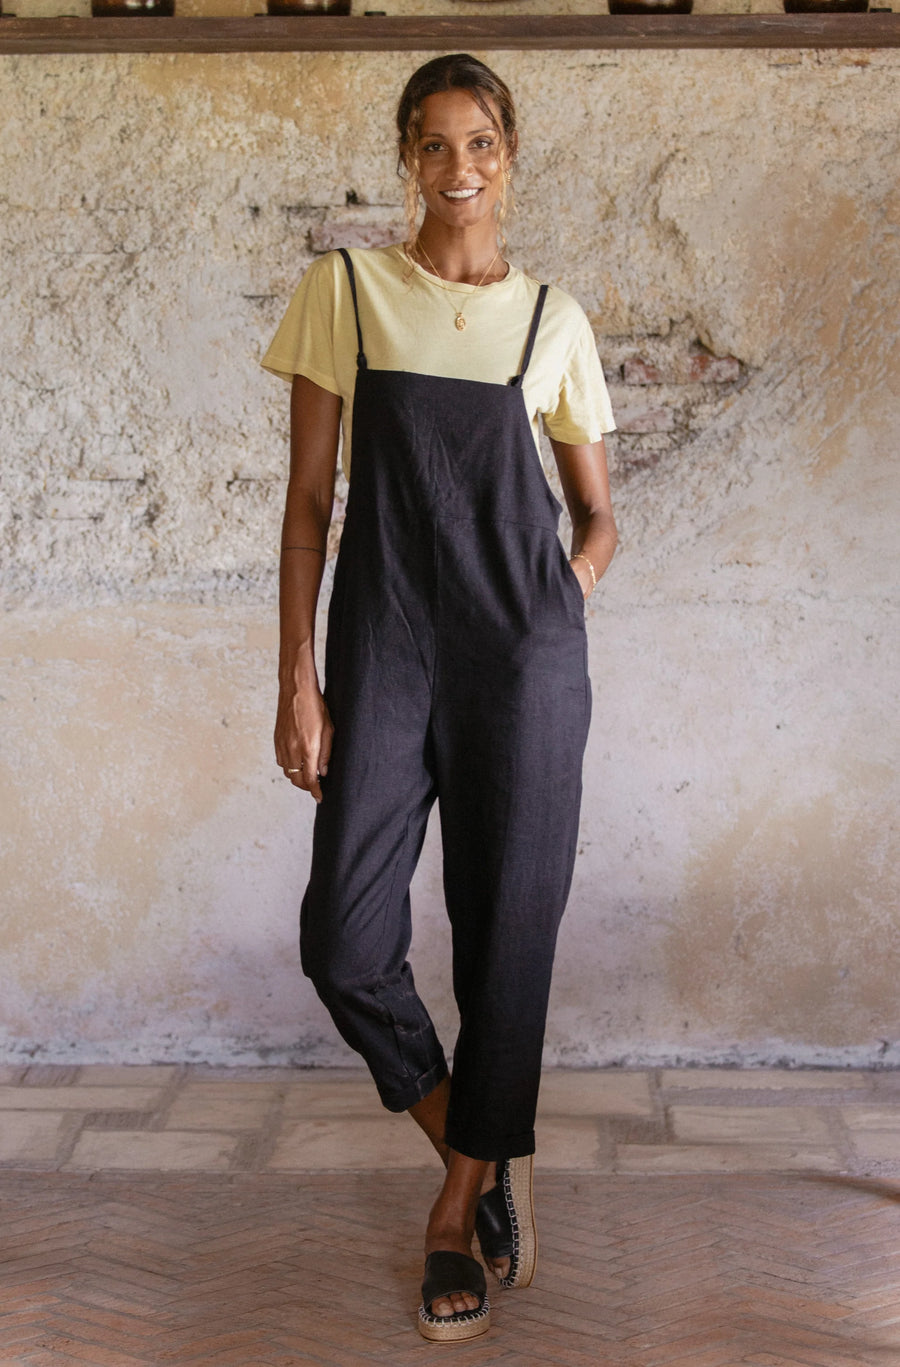 Ready to take your style to an all-new height? Suit up, wanderer. Meet the  Take a Hike Overalls 🥾🌾⛰️ — designed to elevate y